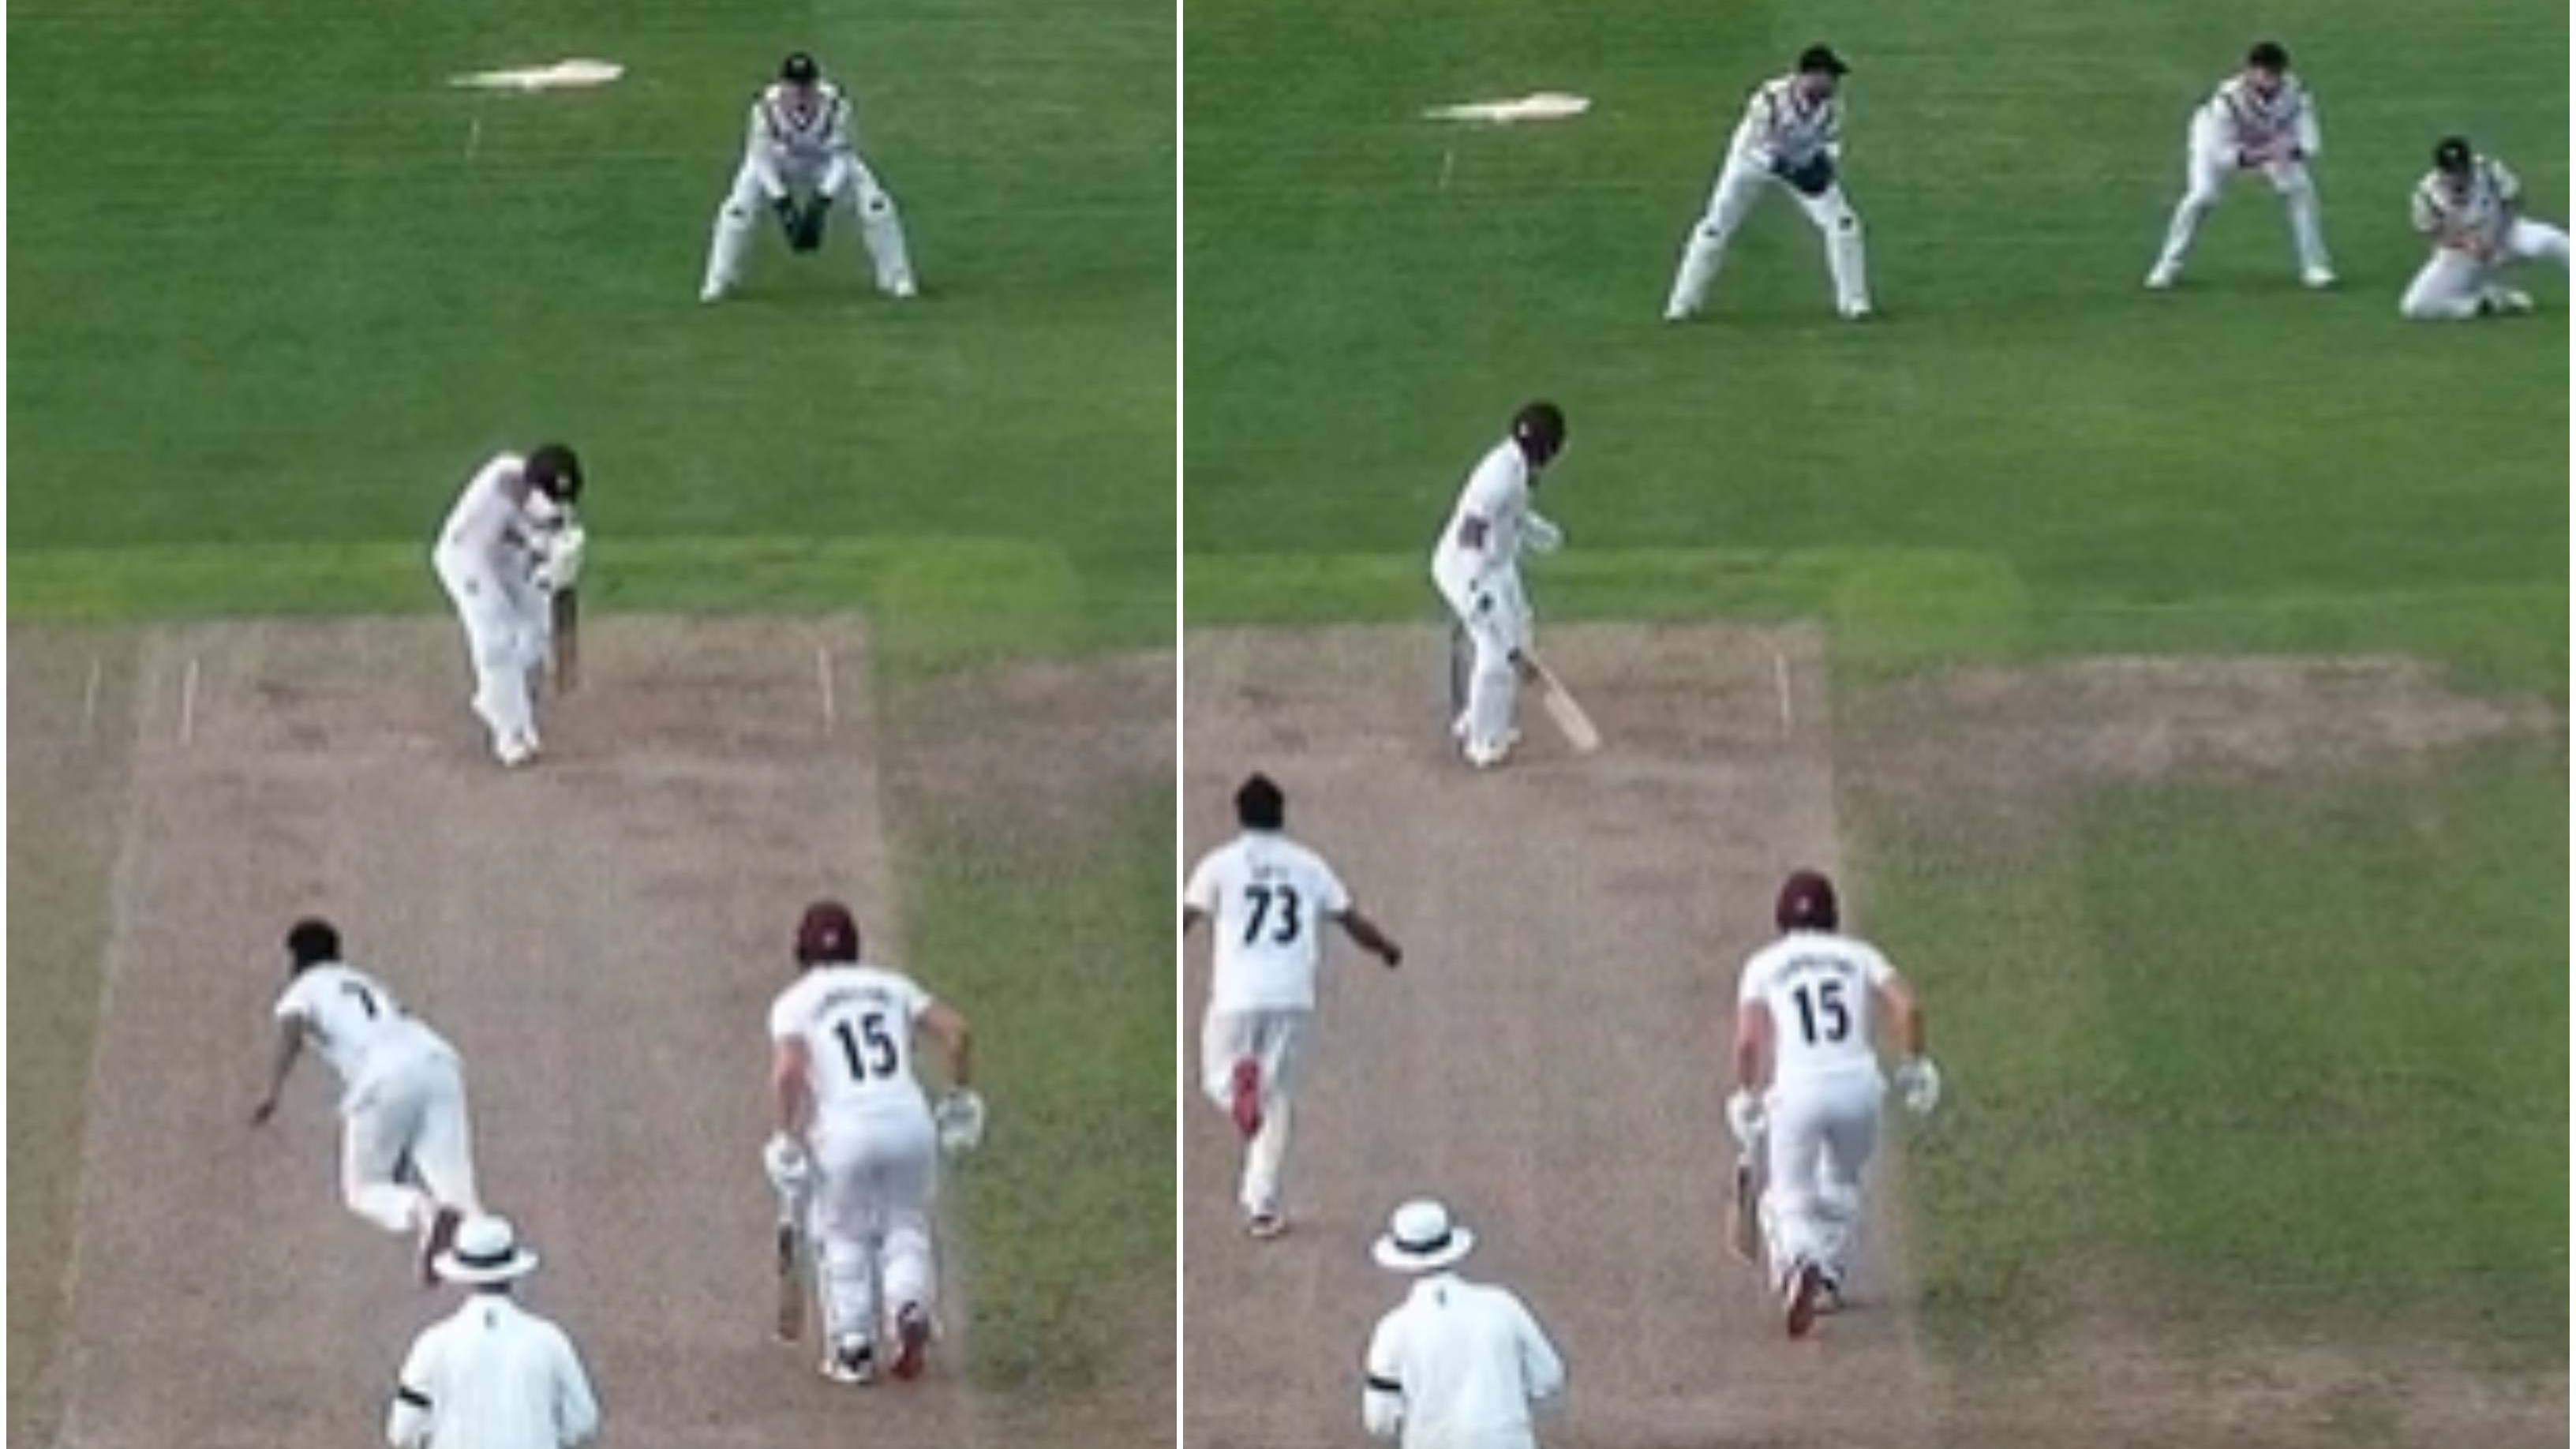 WATCH: India’s Mohammed Siraj dismisses Pakistan opener Imam-ul-Haq for second time in County Championship